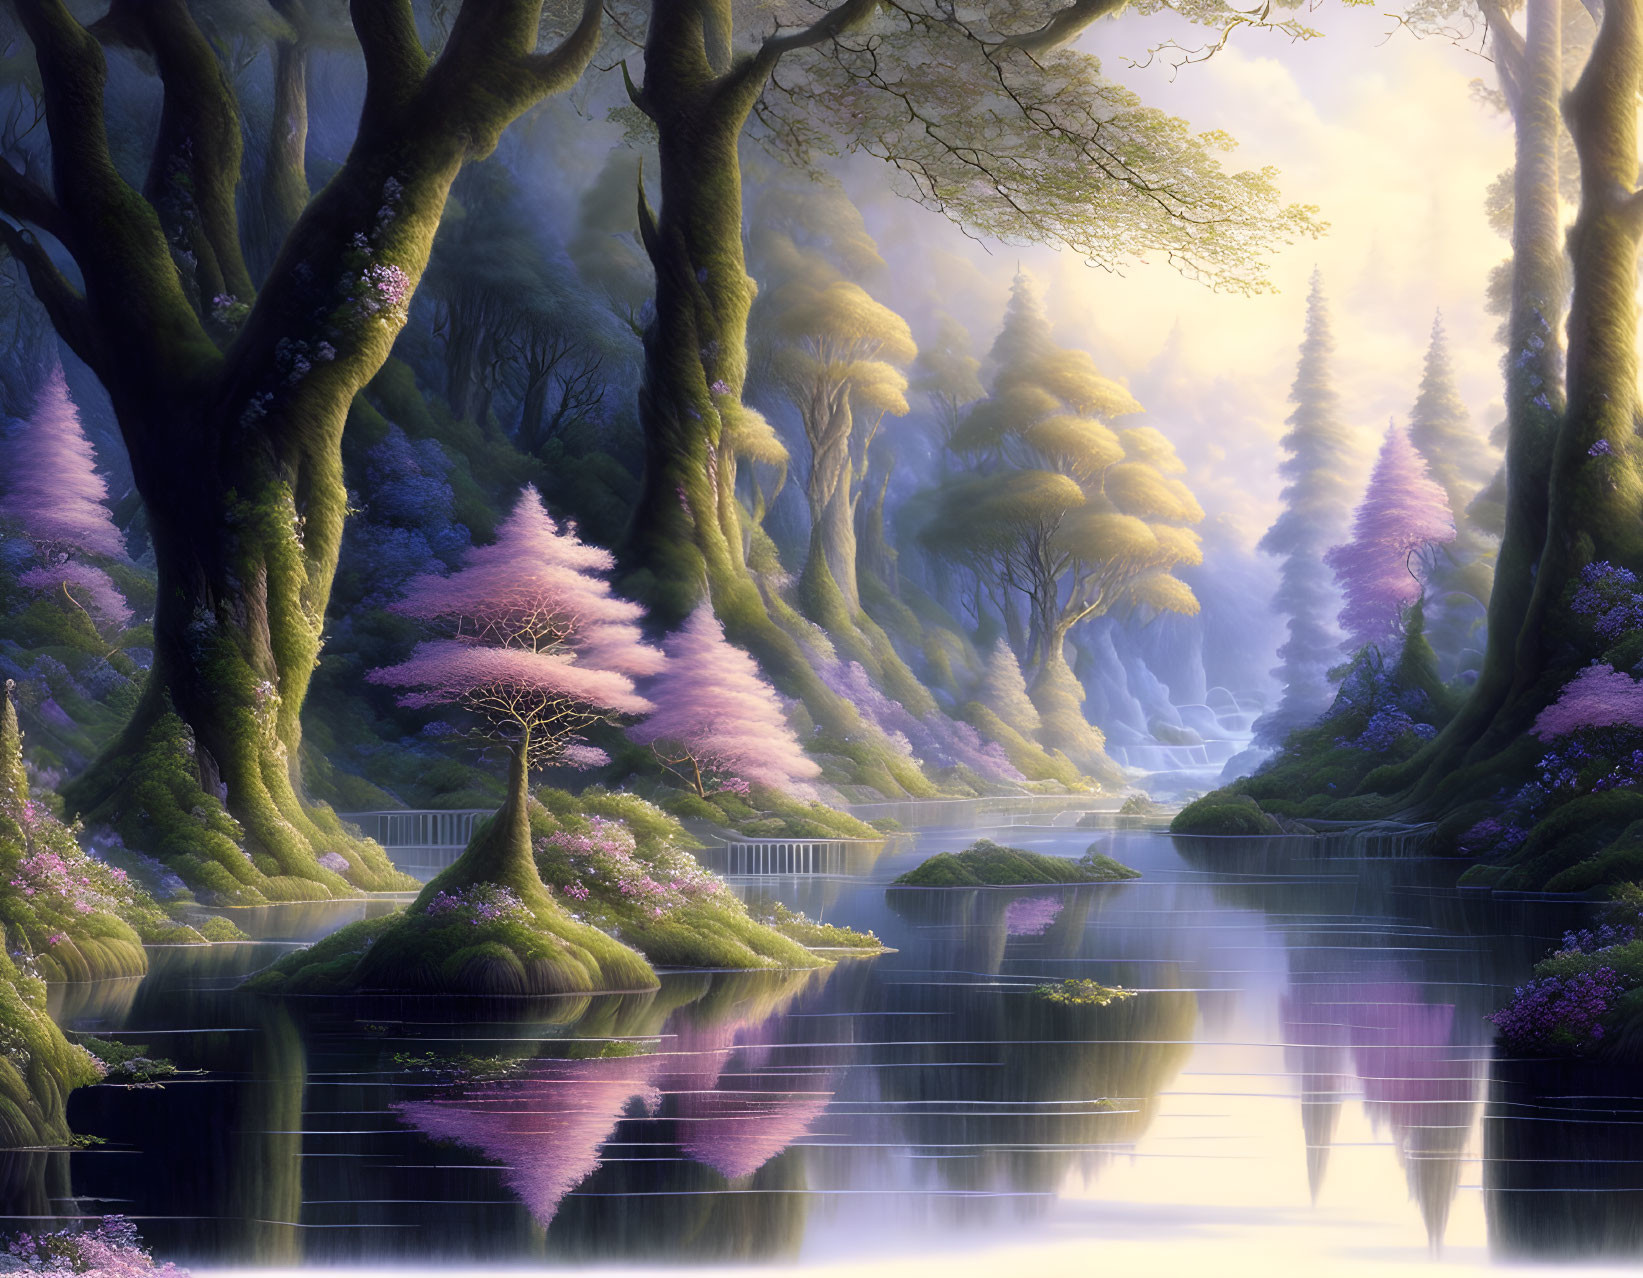 Tranquil fantasy forest with pink foliage, reflective waters, misty atmosphere